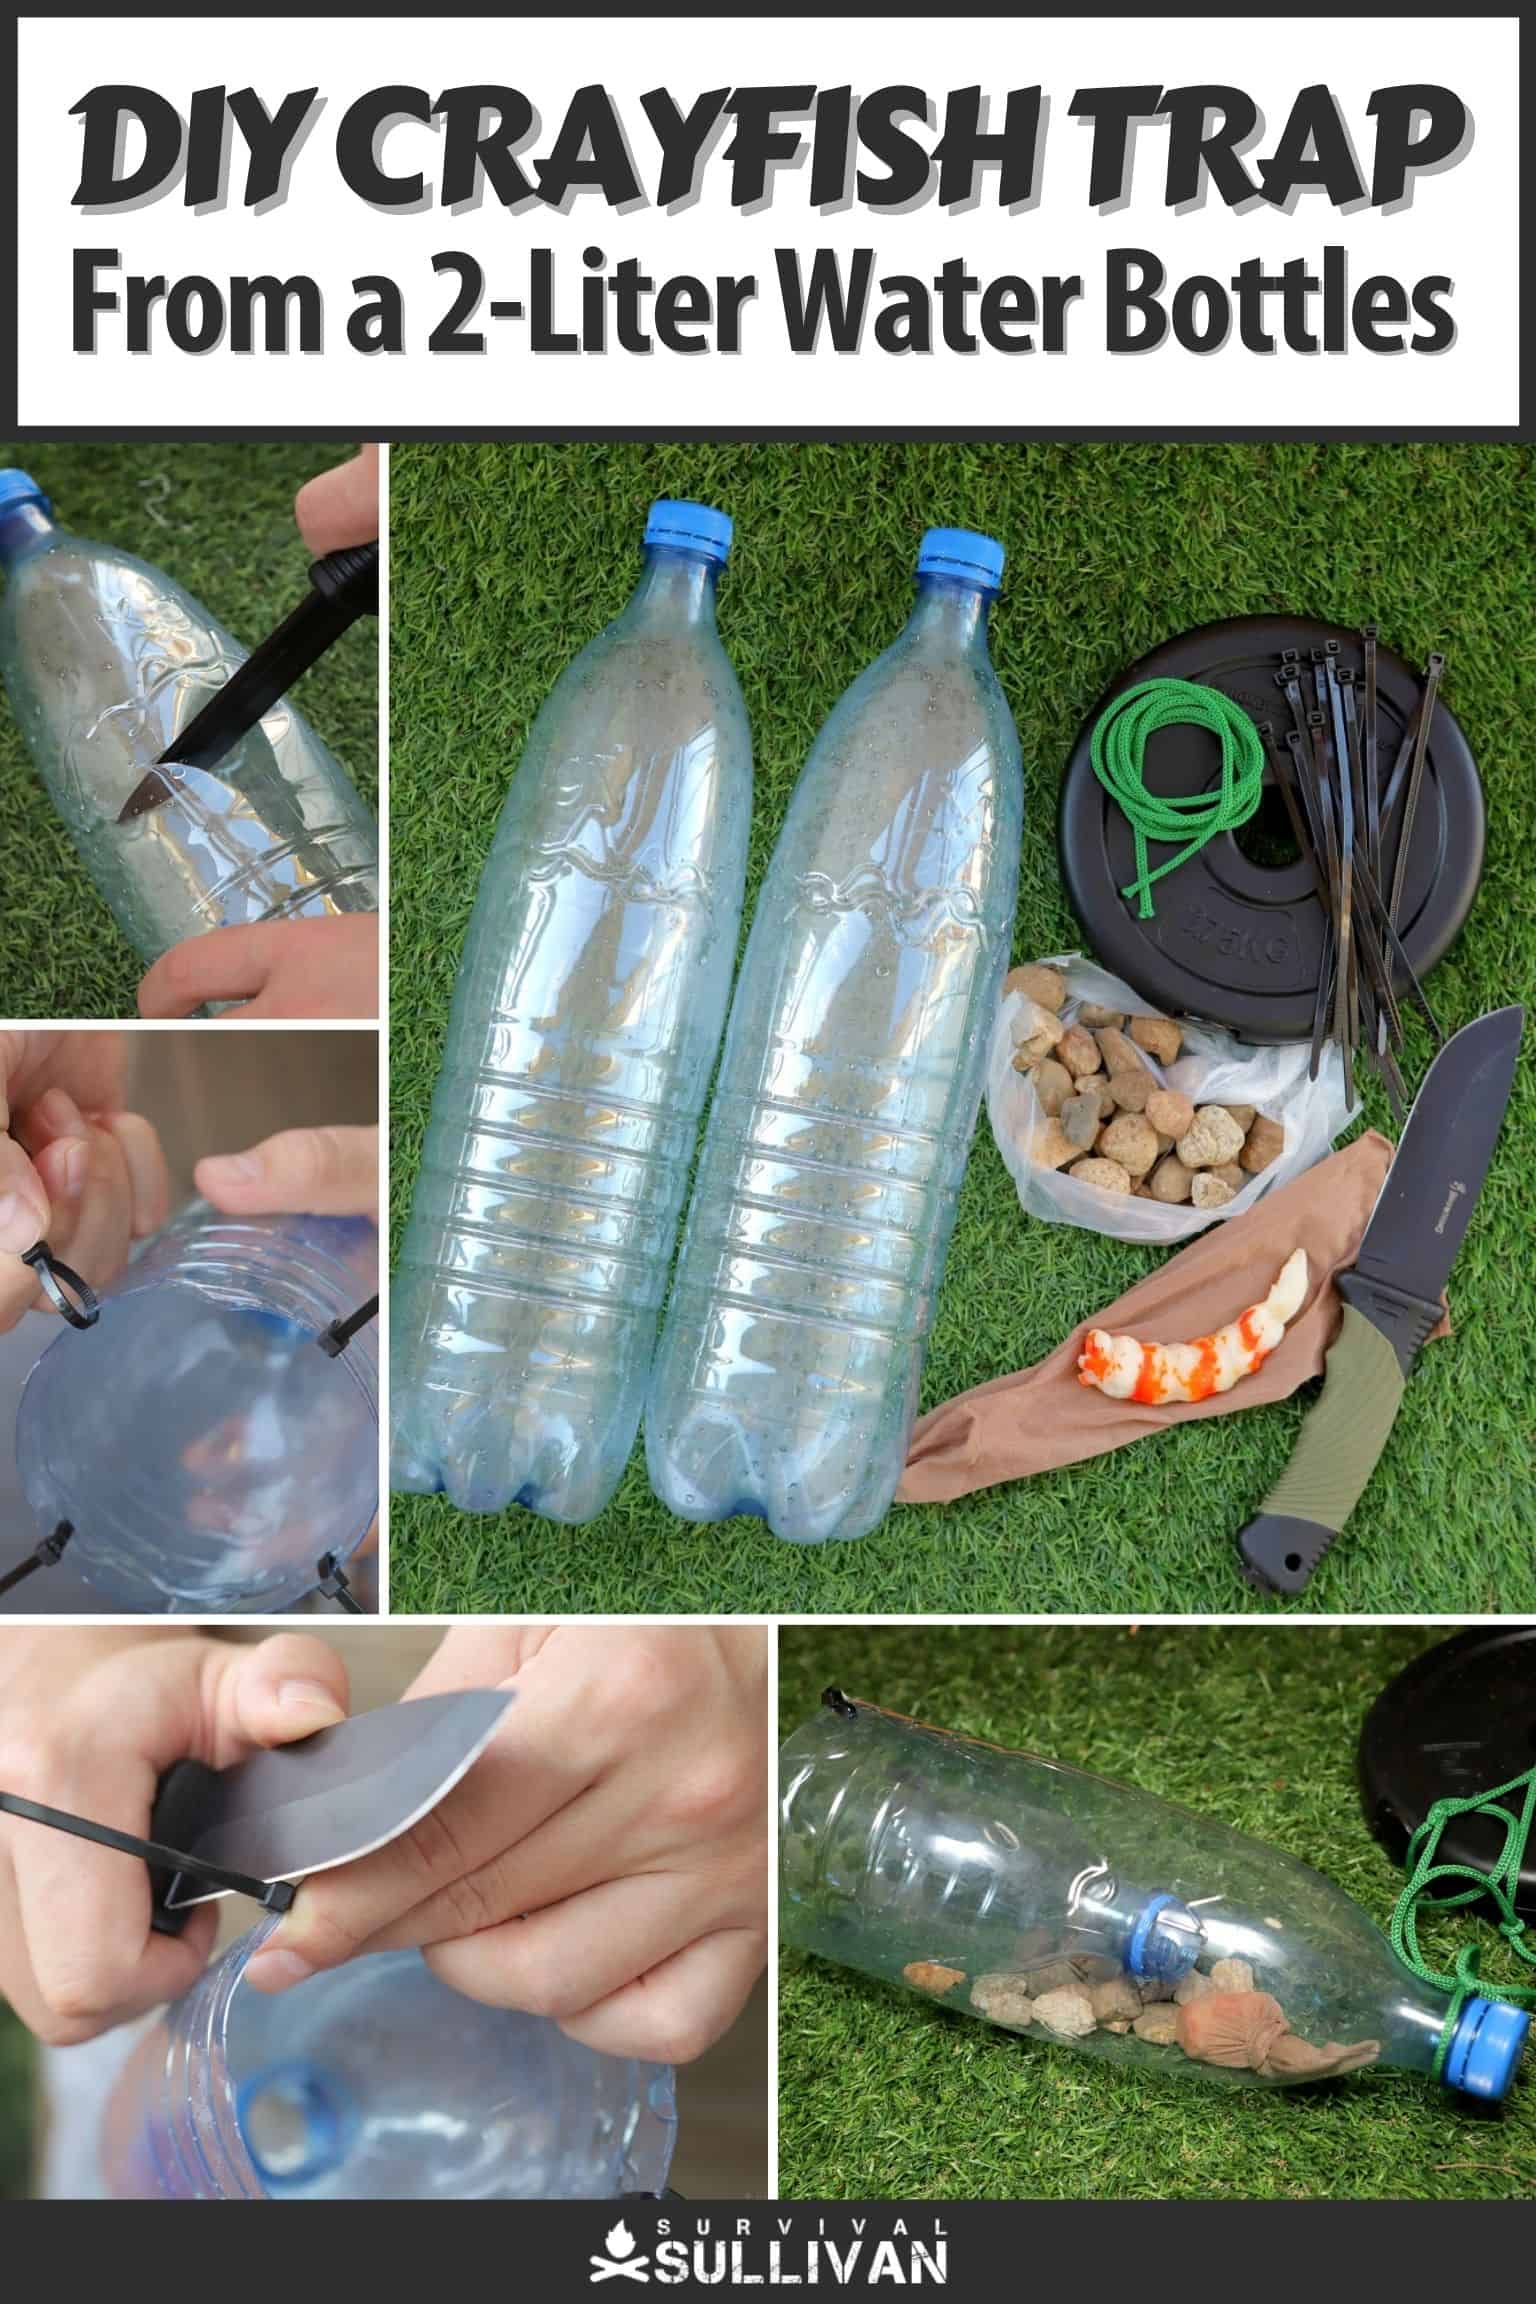 DIY Crayfish Trap From a Two 2-Liter Water Bottles